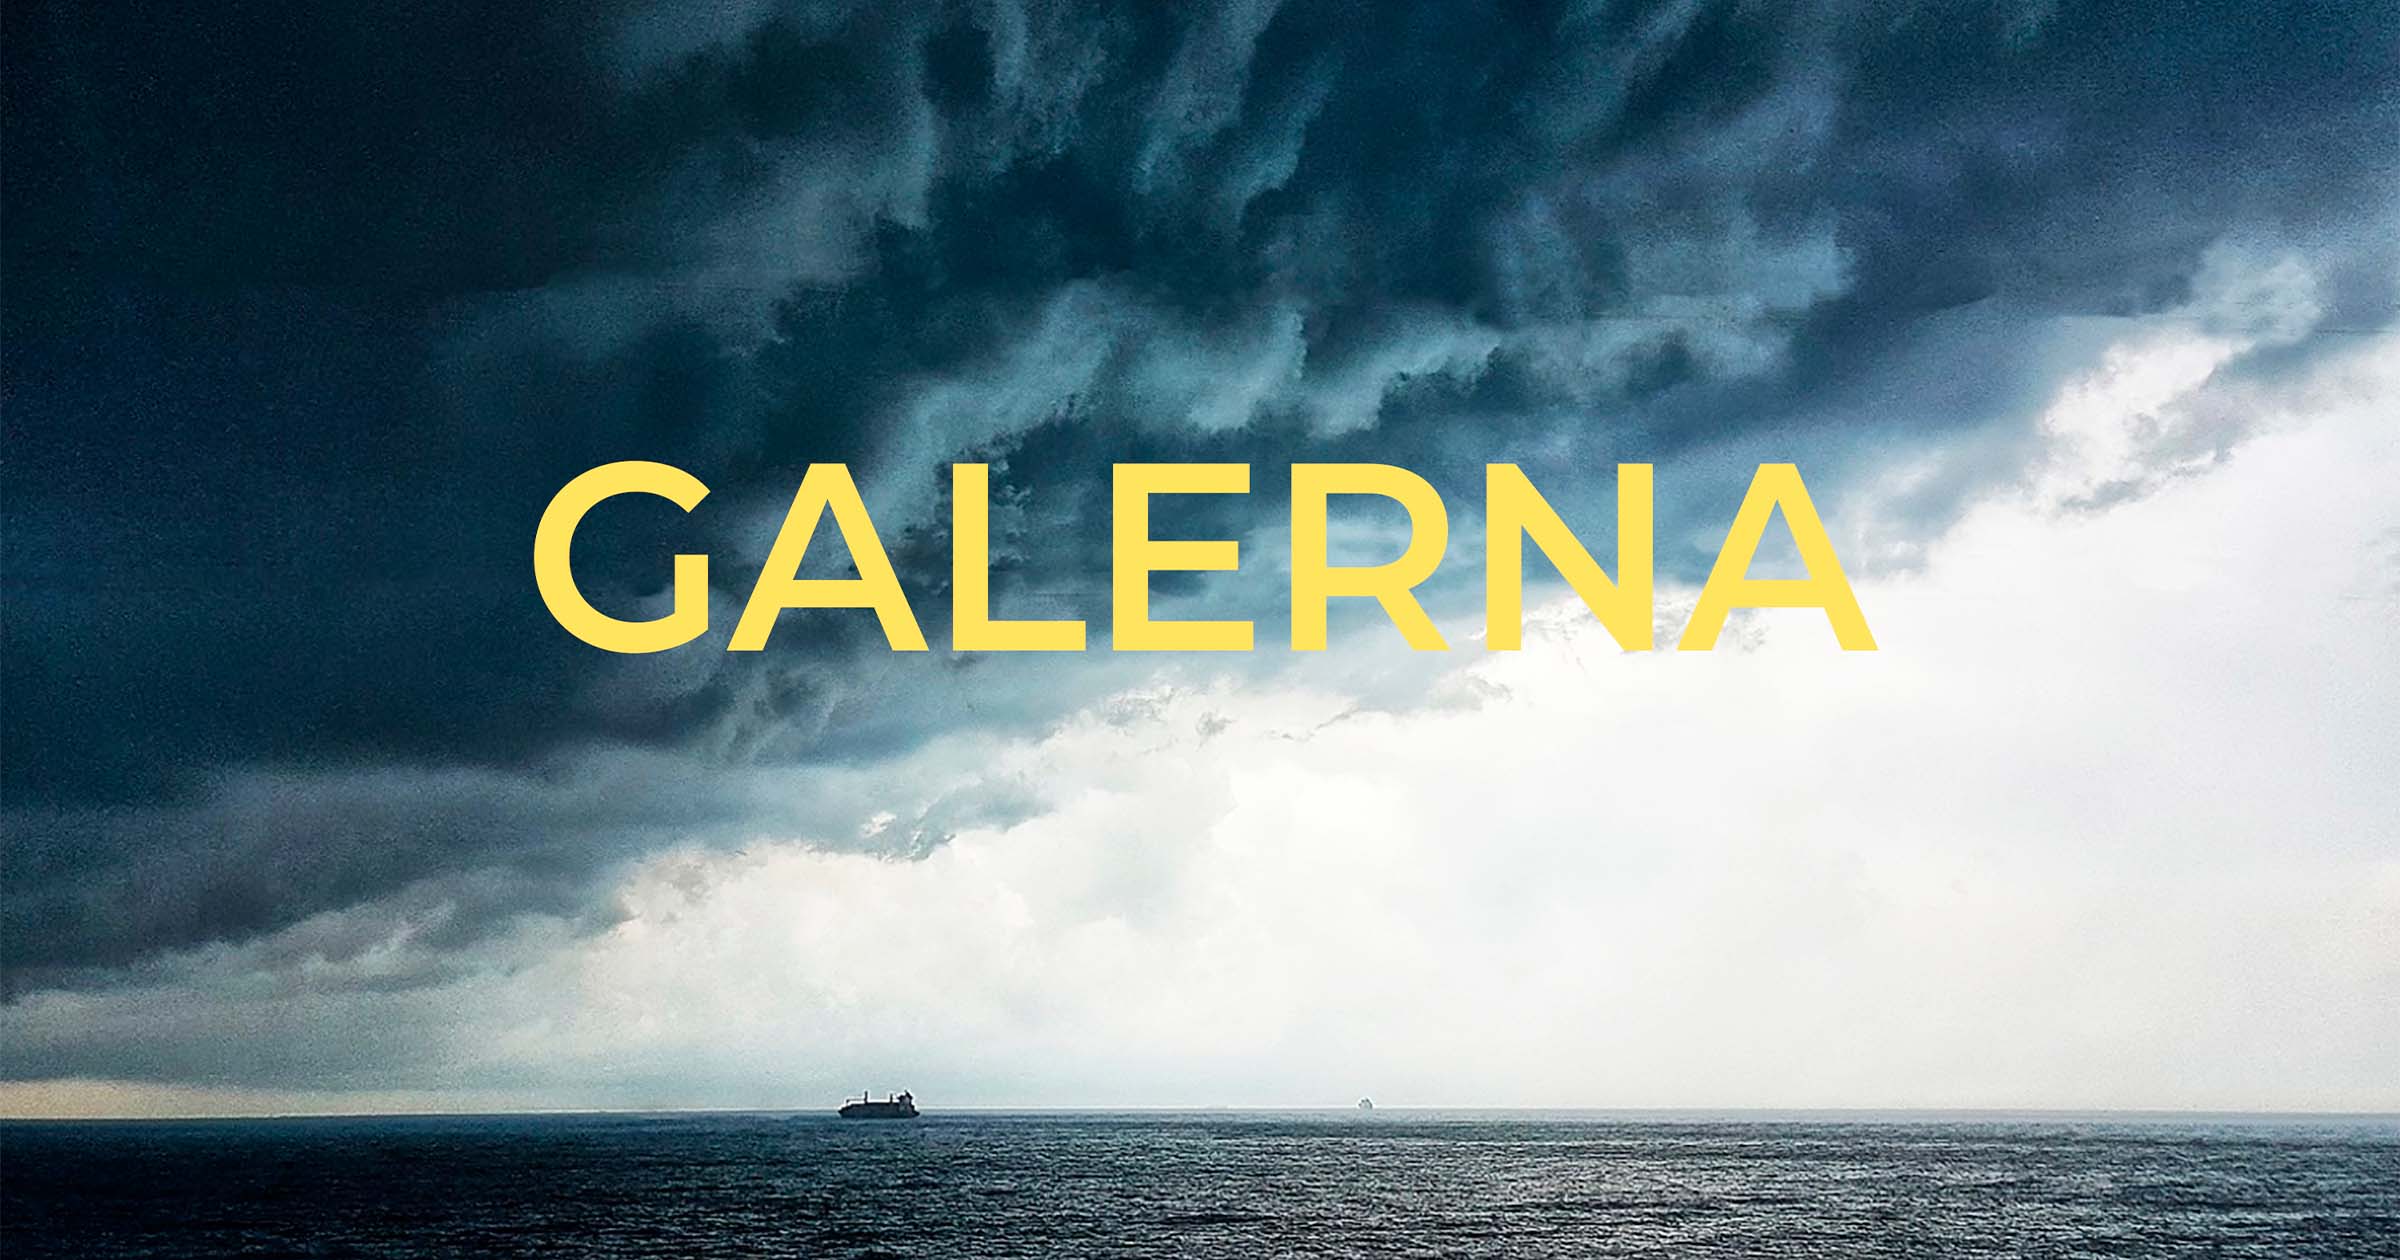 BERMEO AND THE “GALERNA”. THE GULF OF BISCAY’S CAT. 1 HURRICANE